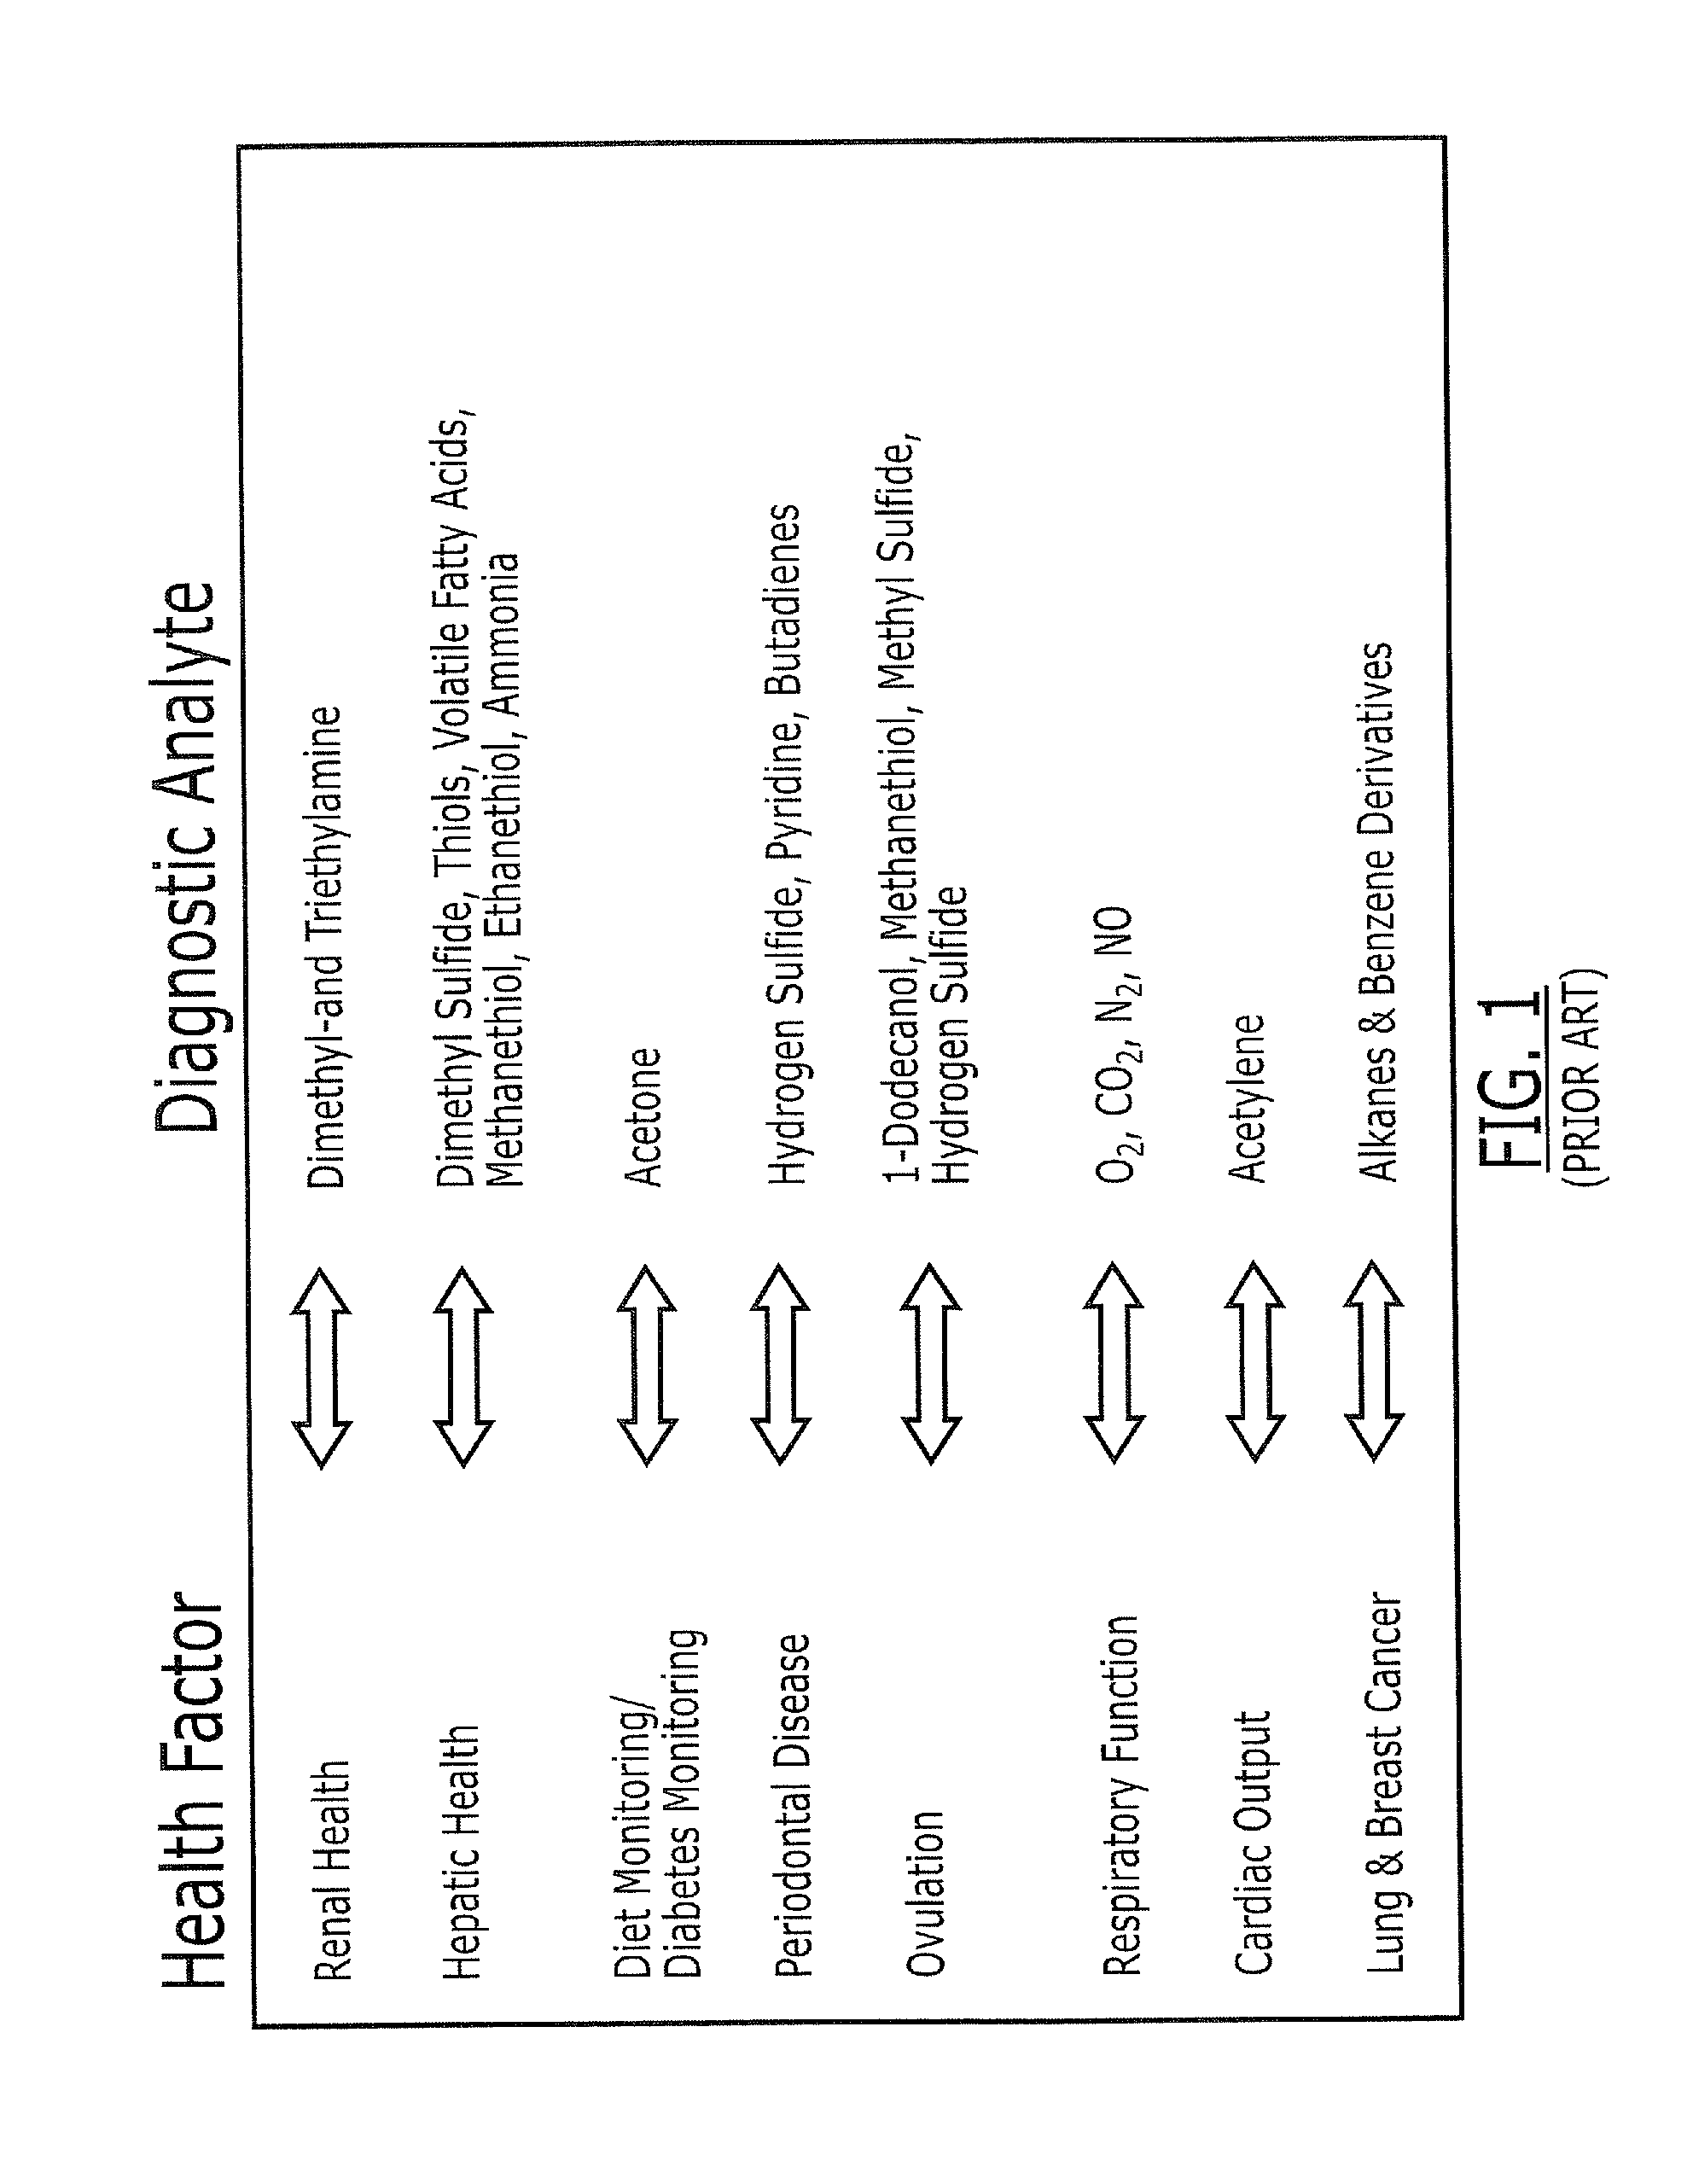 Photoelectrocatalytic fluid analyte sensors and methods of fabricating and using same